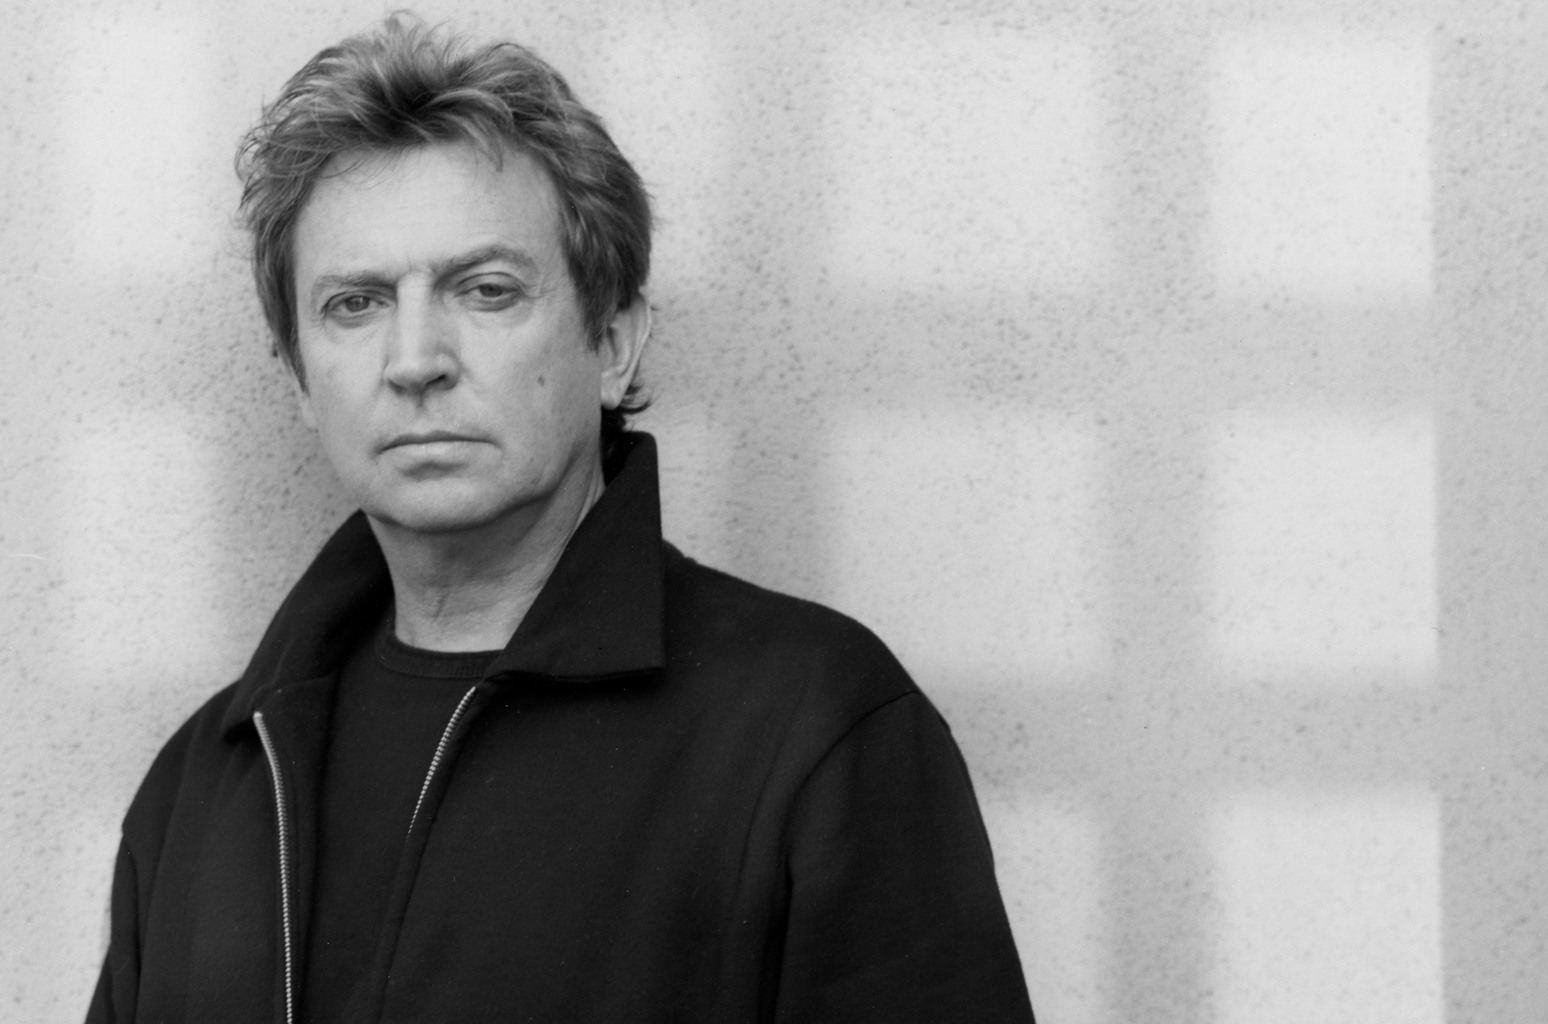 The Police's Andy Summers on Combining His Photography & Music for Solo